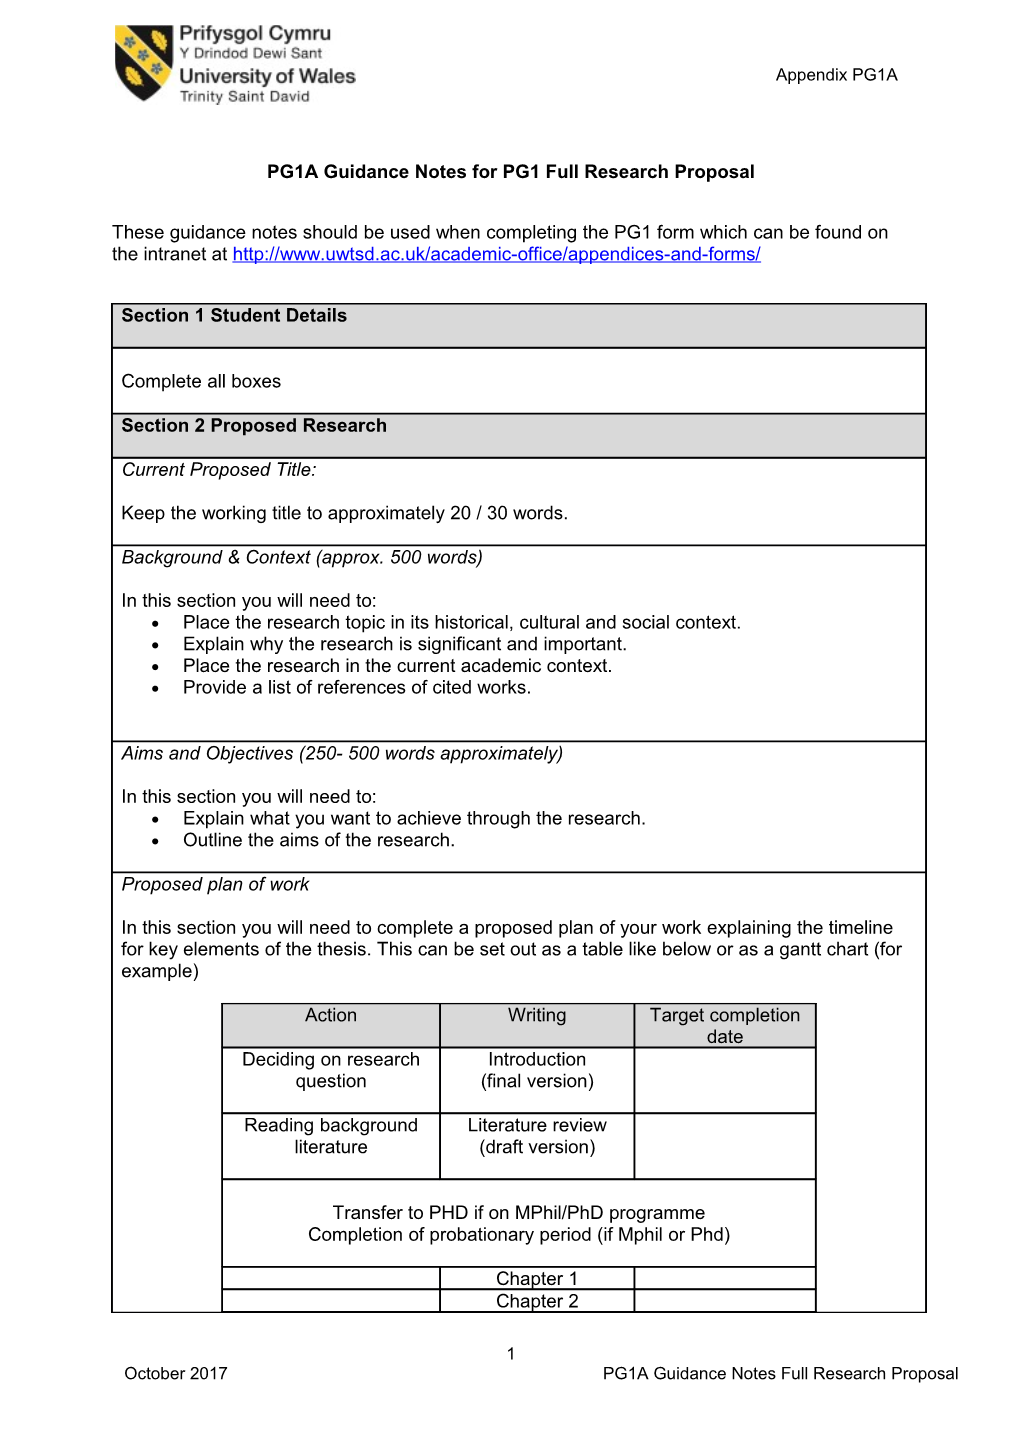 PG1A Guidance Notes for PG1 Full Research Proposal